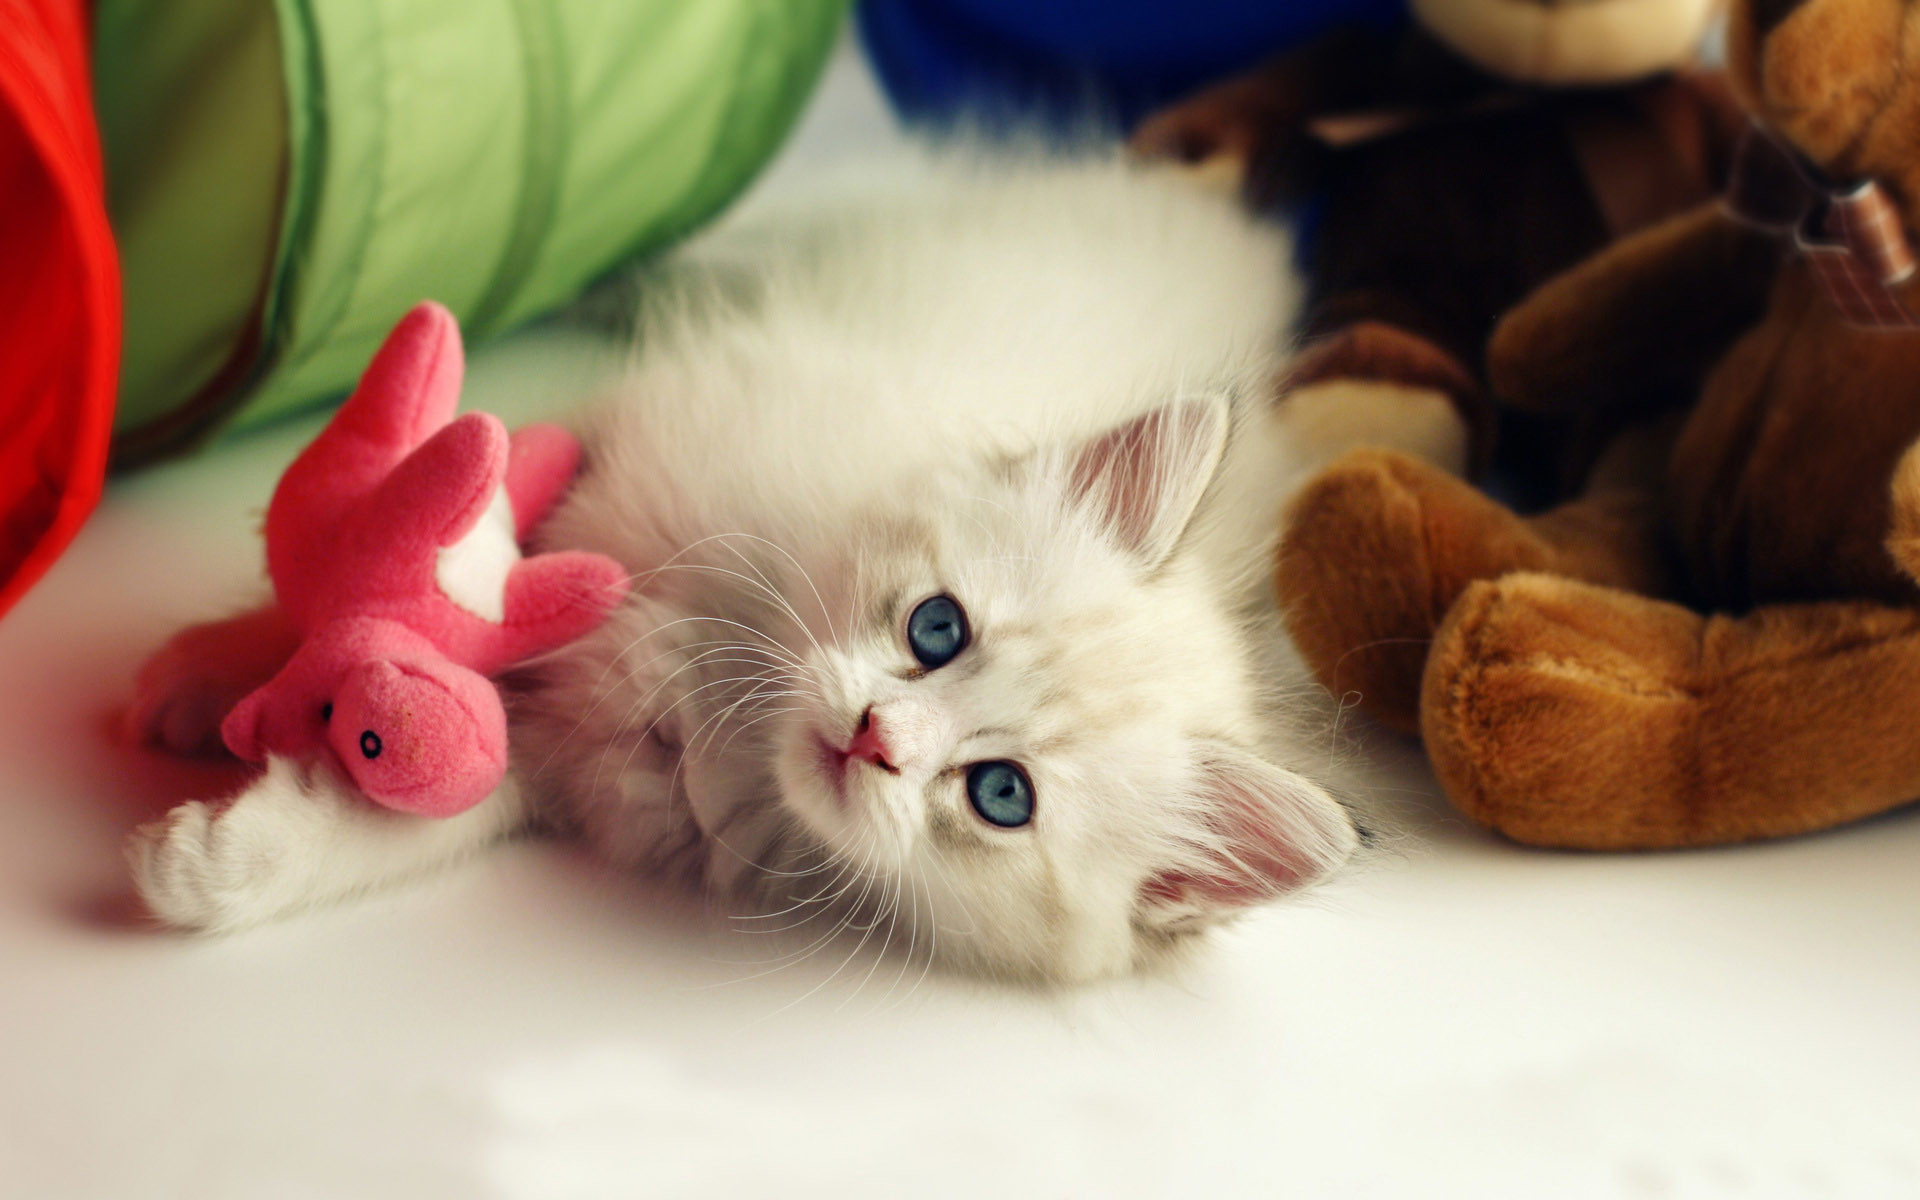 Cutest Wallpapers Ever (56+ images)